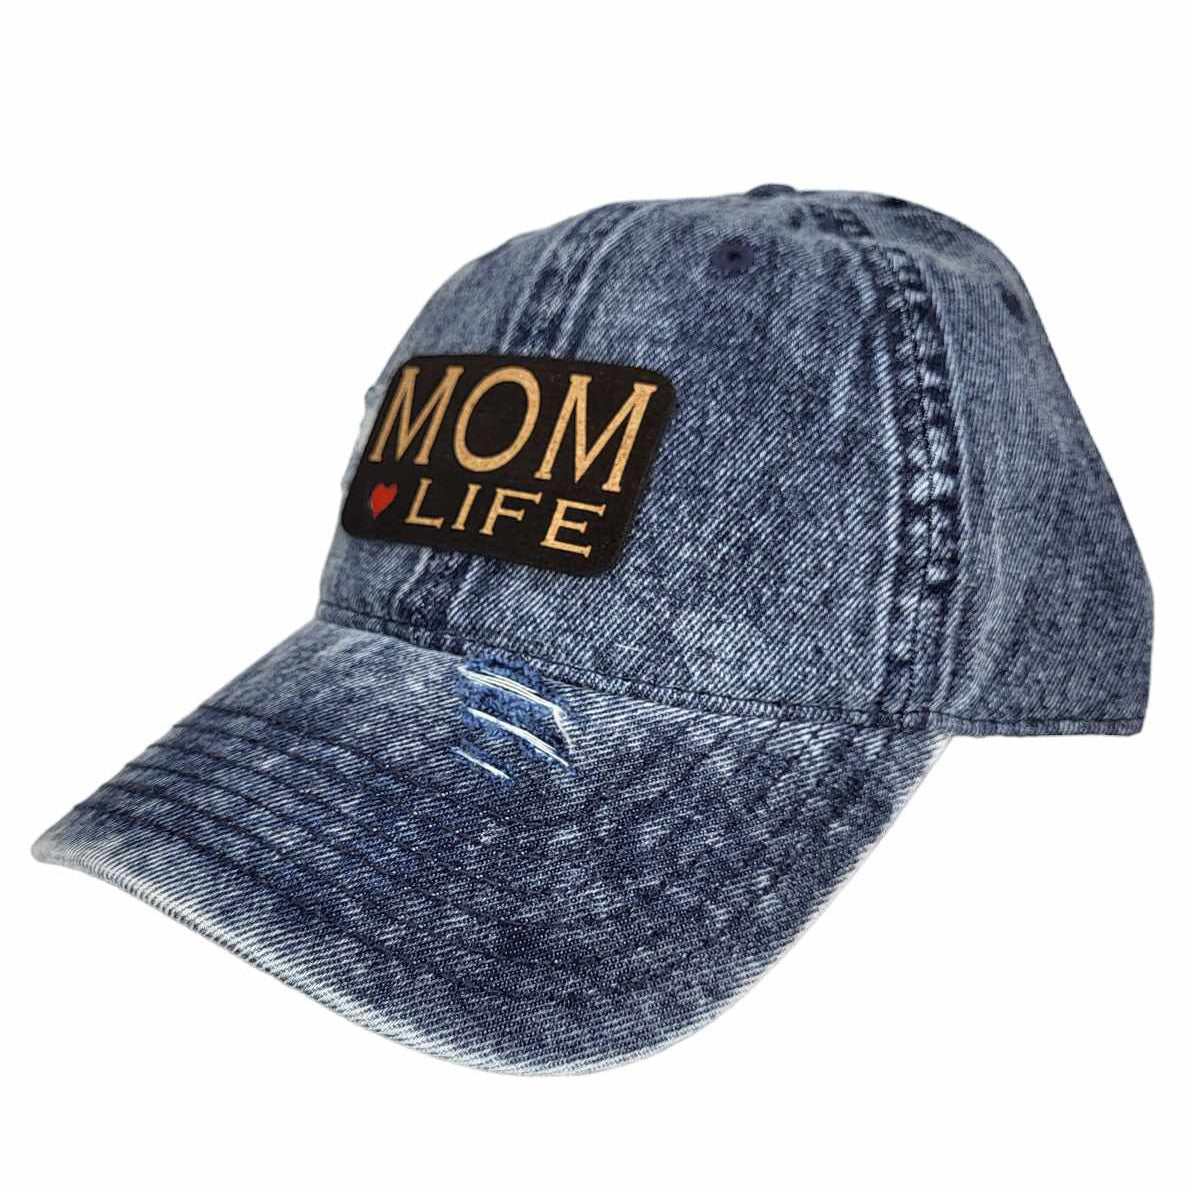 Mom Life Curved Bill Hat